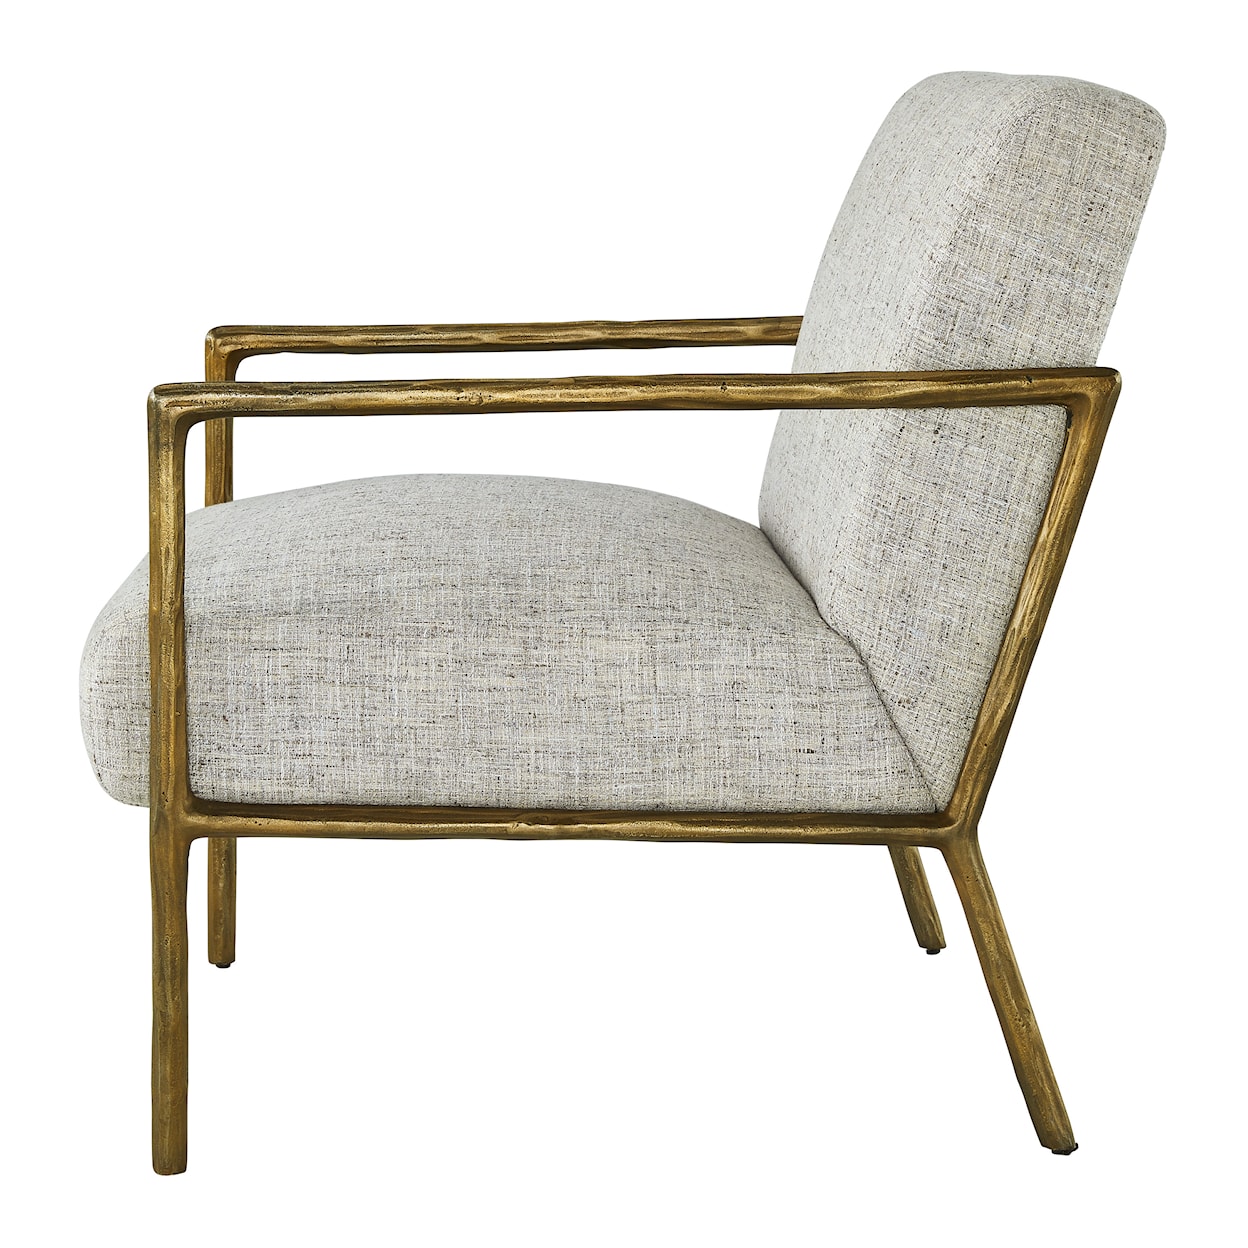 StyleLine Riana Accent Chair